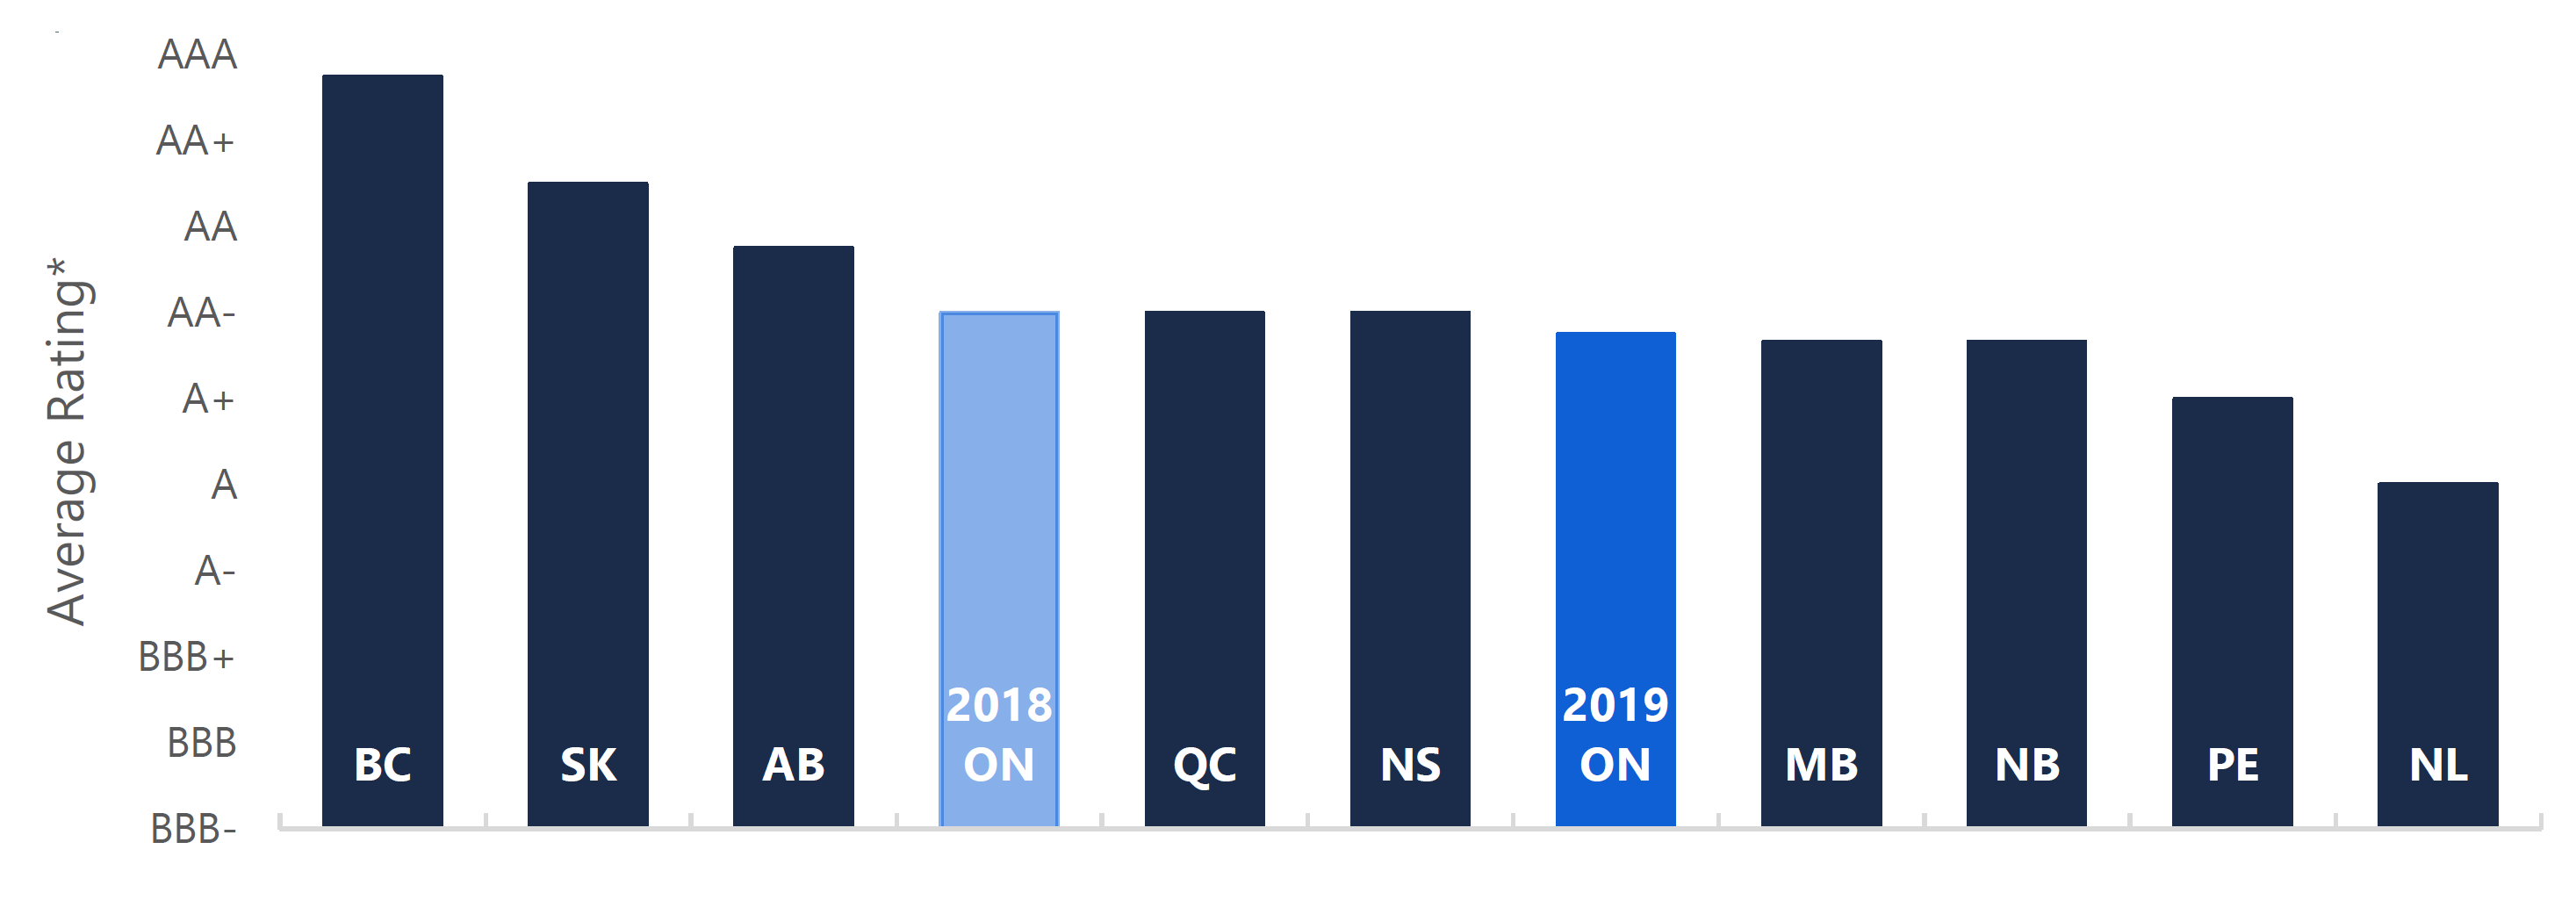 Average Credit Rating by Province as of October 2019